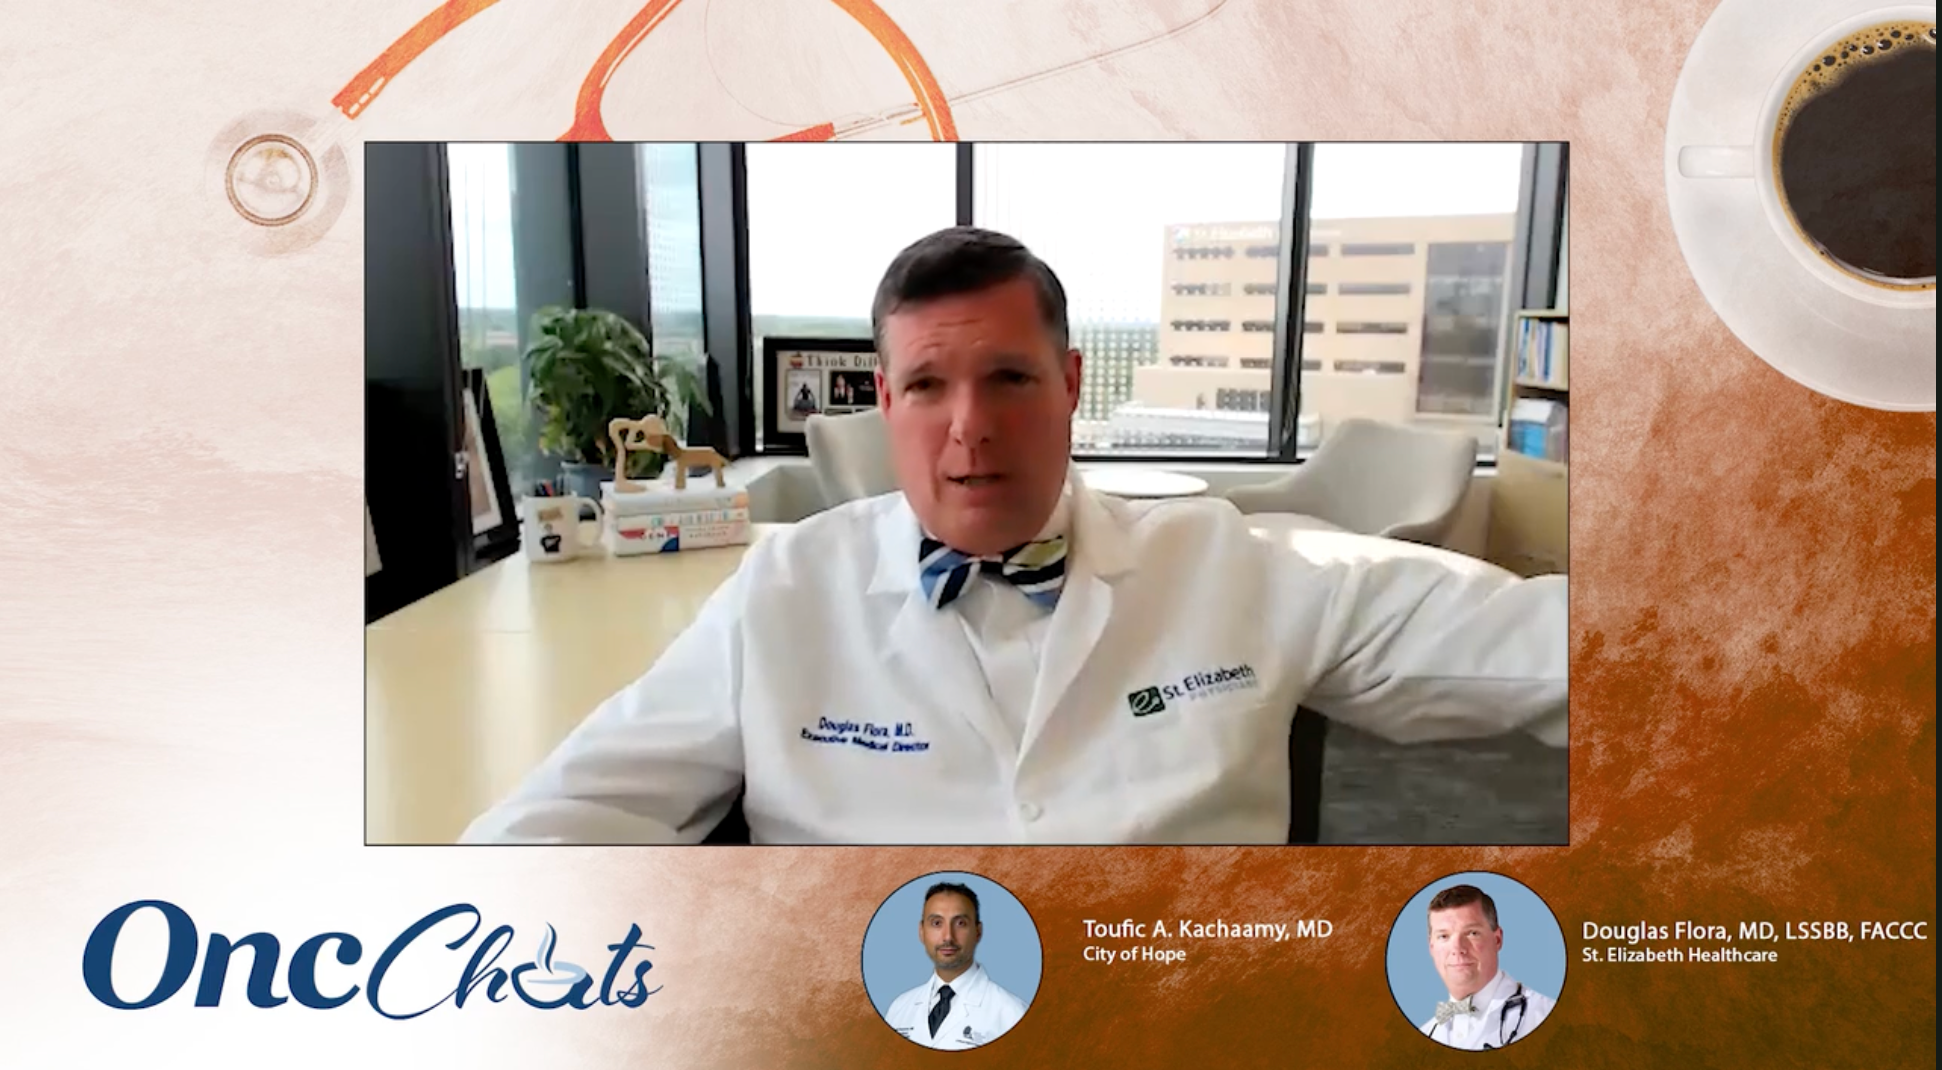 In this eighth episode of OncChats: Assessing the Promise of AI in Oncology, Toufic A. Kachaamy, MD, and Douglas Flora, MD, LSSBB, FACCC, explain how artificial intelligence tools are being developed to match the right patient to the right drug on the right clinical trial.